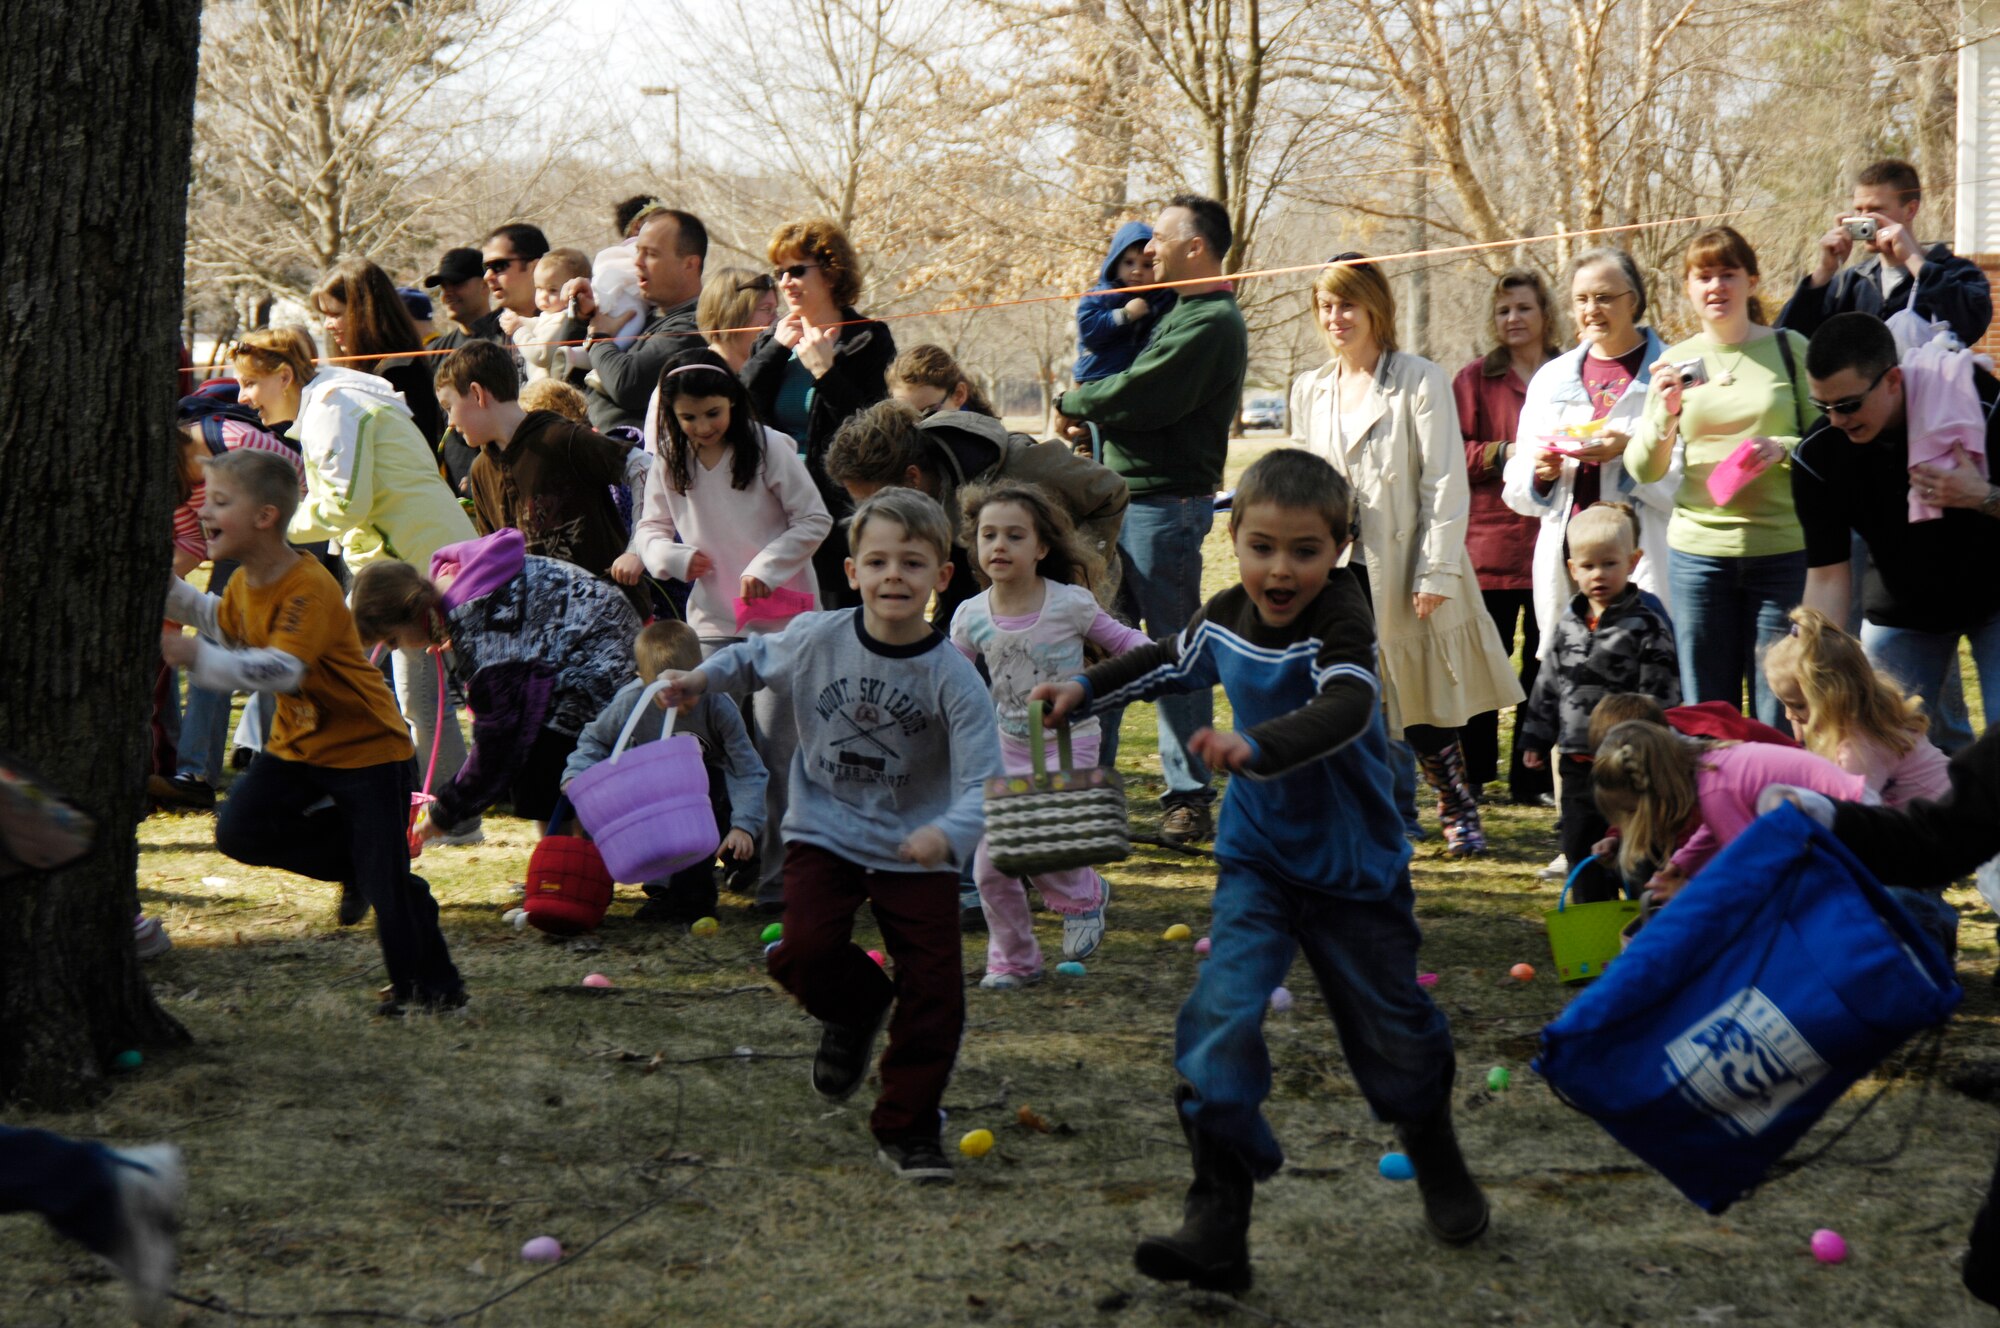 HANSCOM AIR FORCE BASE, Mass. –Hanscom children rush to gather eggs during the Spring Fling event, March 28 at the Base Chapel. The event was sponsored by the Hanscom Spouses Club and Base Chapel and included a number of family activities such as crafts, games, face painting and a visit from the Easter Bunny. (U.S. Air Force photo by Linda LaBonte Britt)